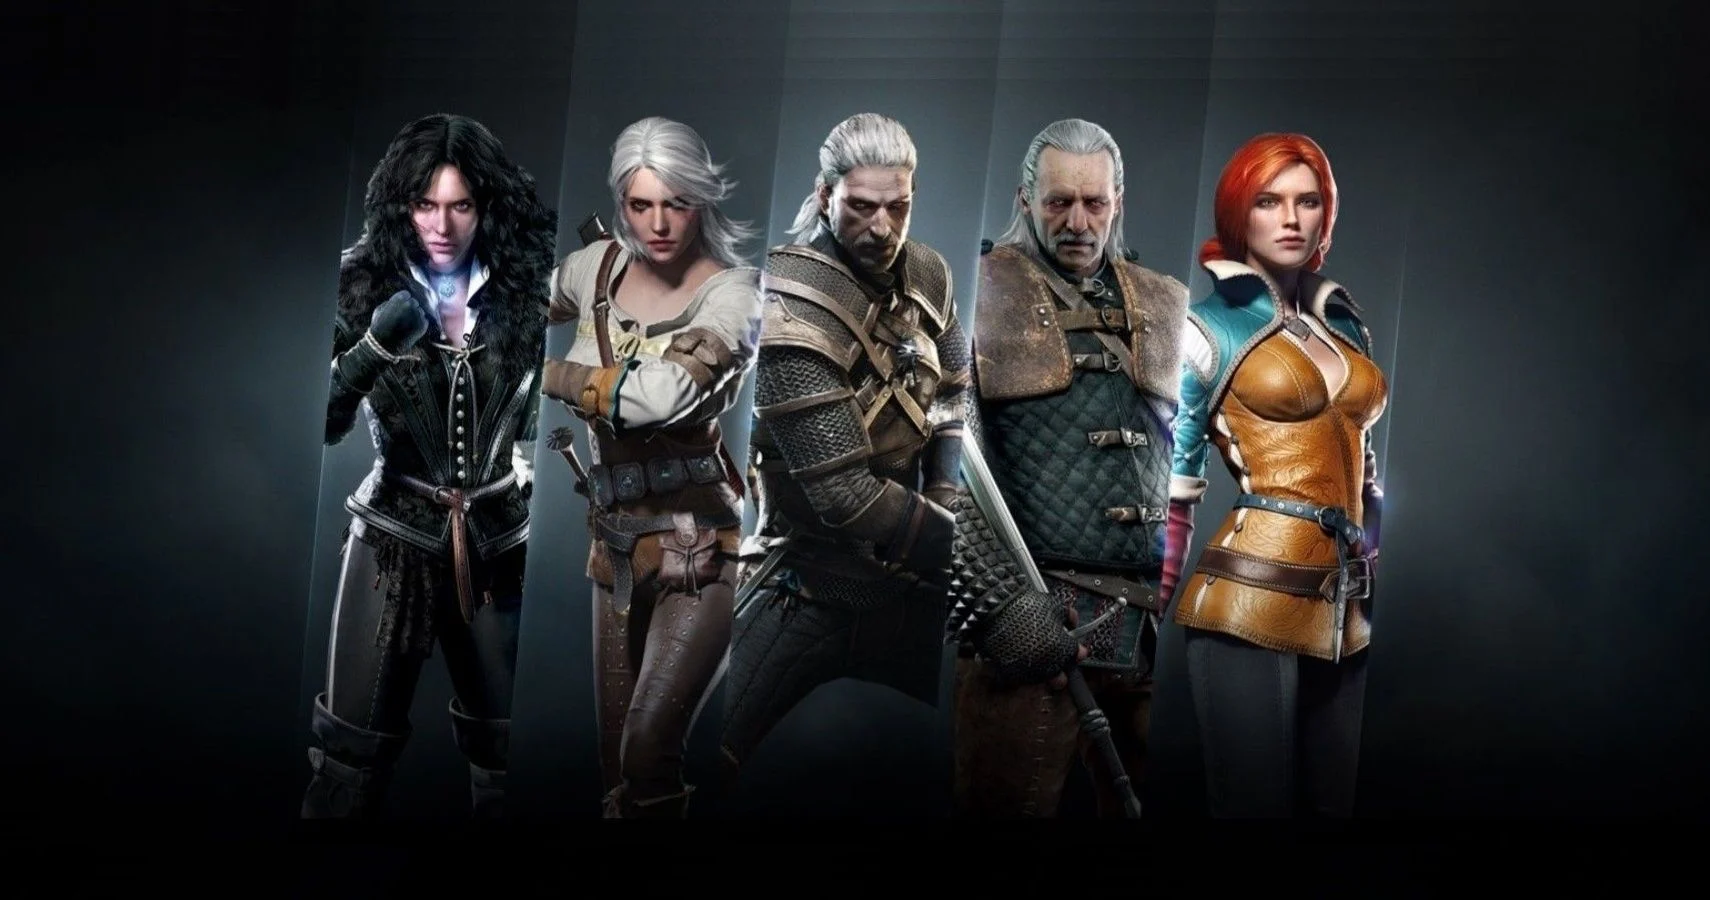 The Witcher: The Main Characters